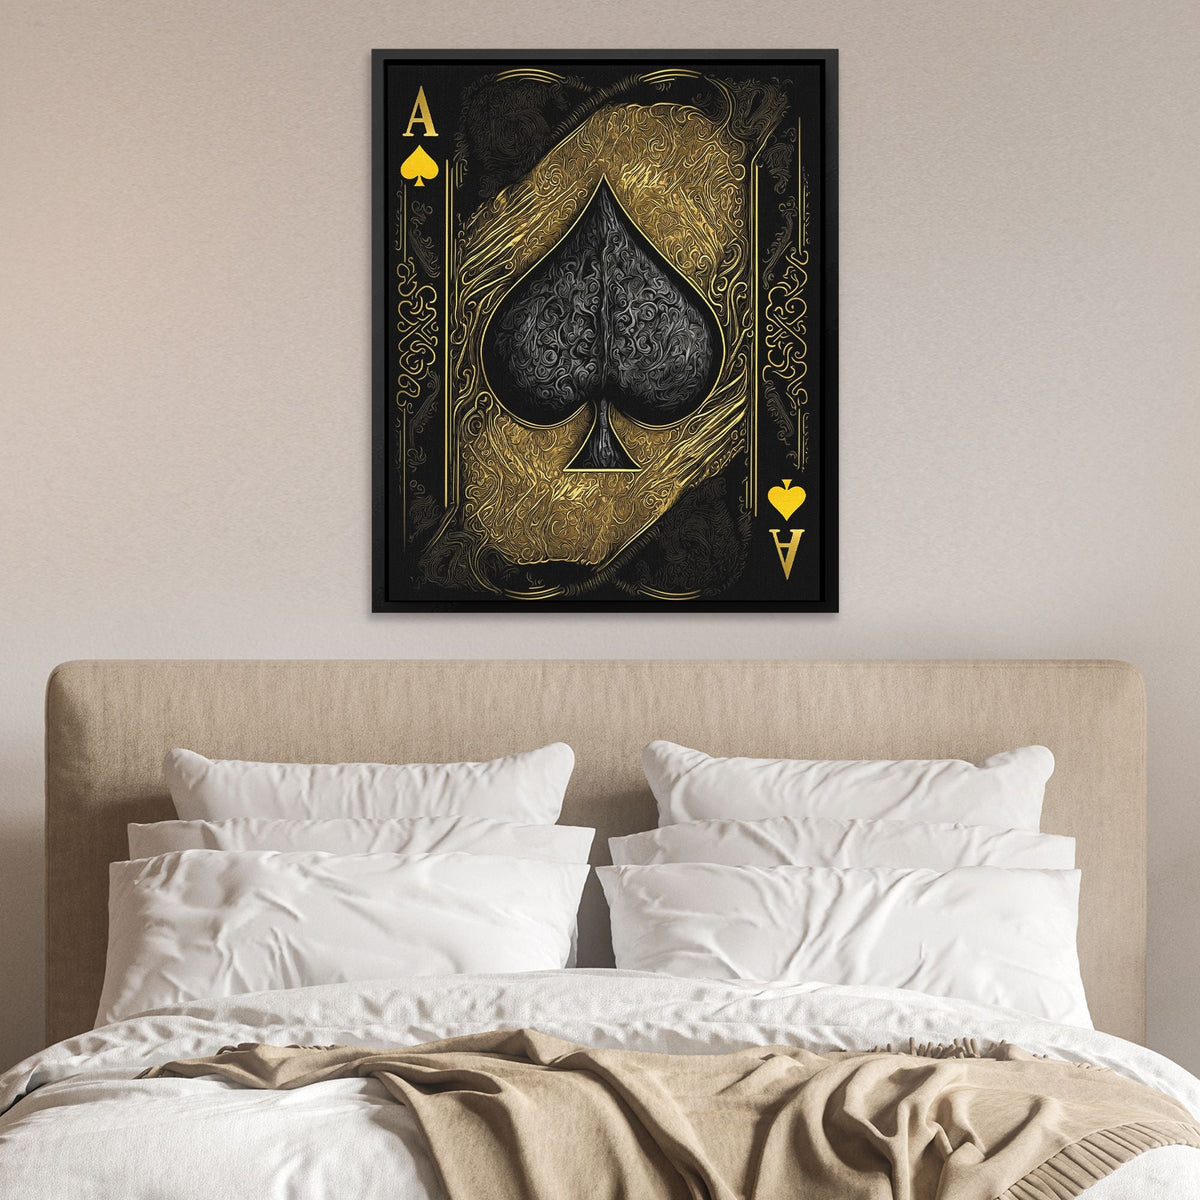 Gold Ace of Spades - Black and Gold Poker Wall Art - Luxury Wall Art